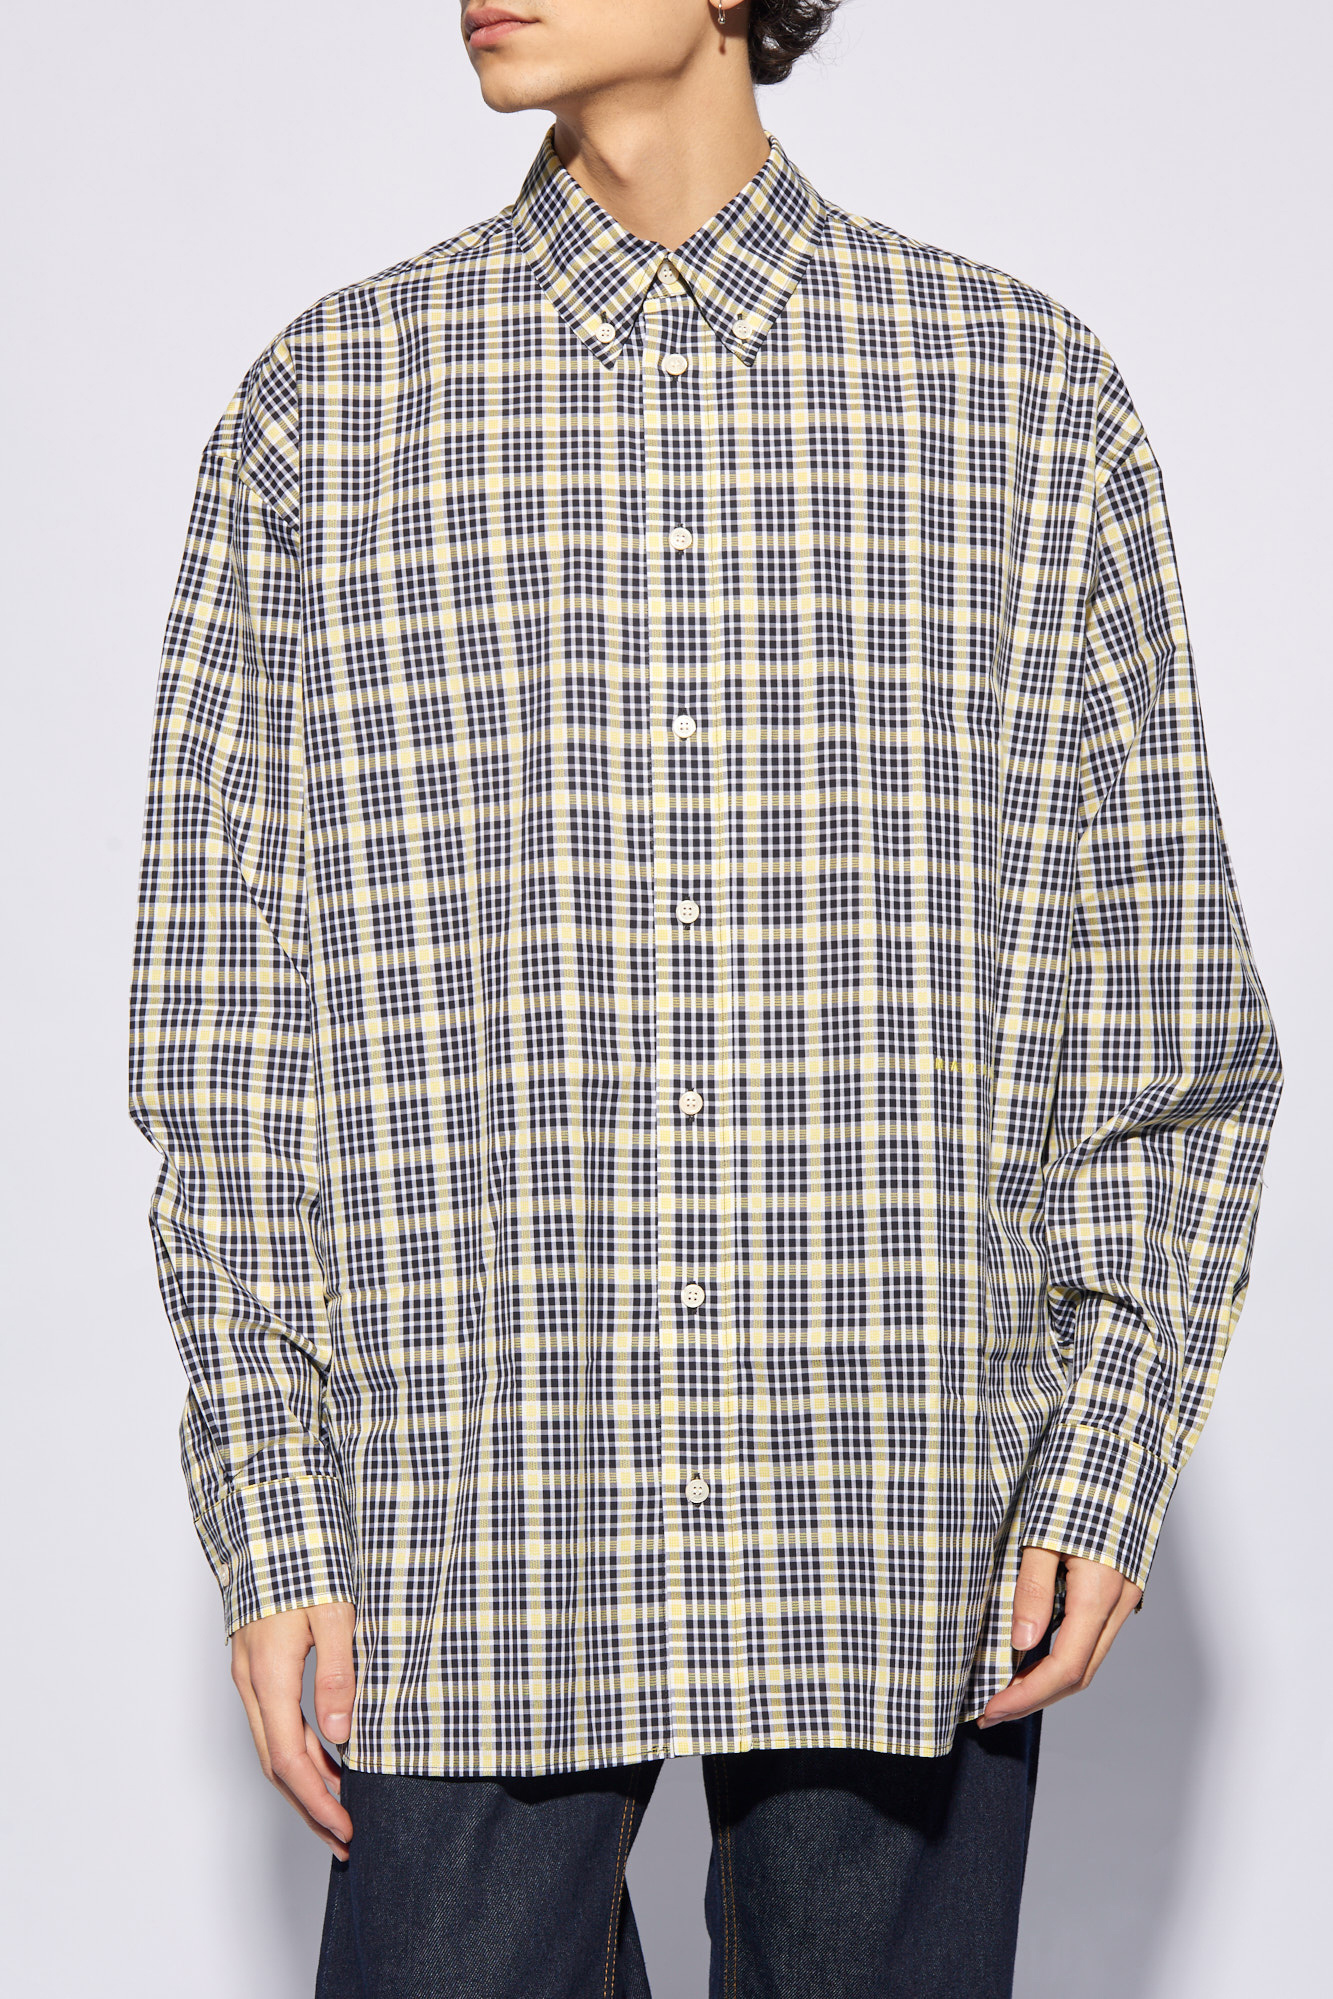 Check styling ideas for「JACQUARD LONG SLEEVE CREW NECK SWEATER、SOFT BRUSHED  CHECKED LONG SLEEVE SHIRT」